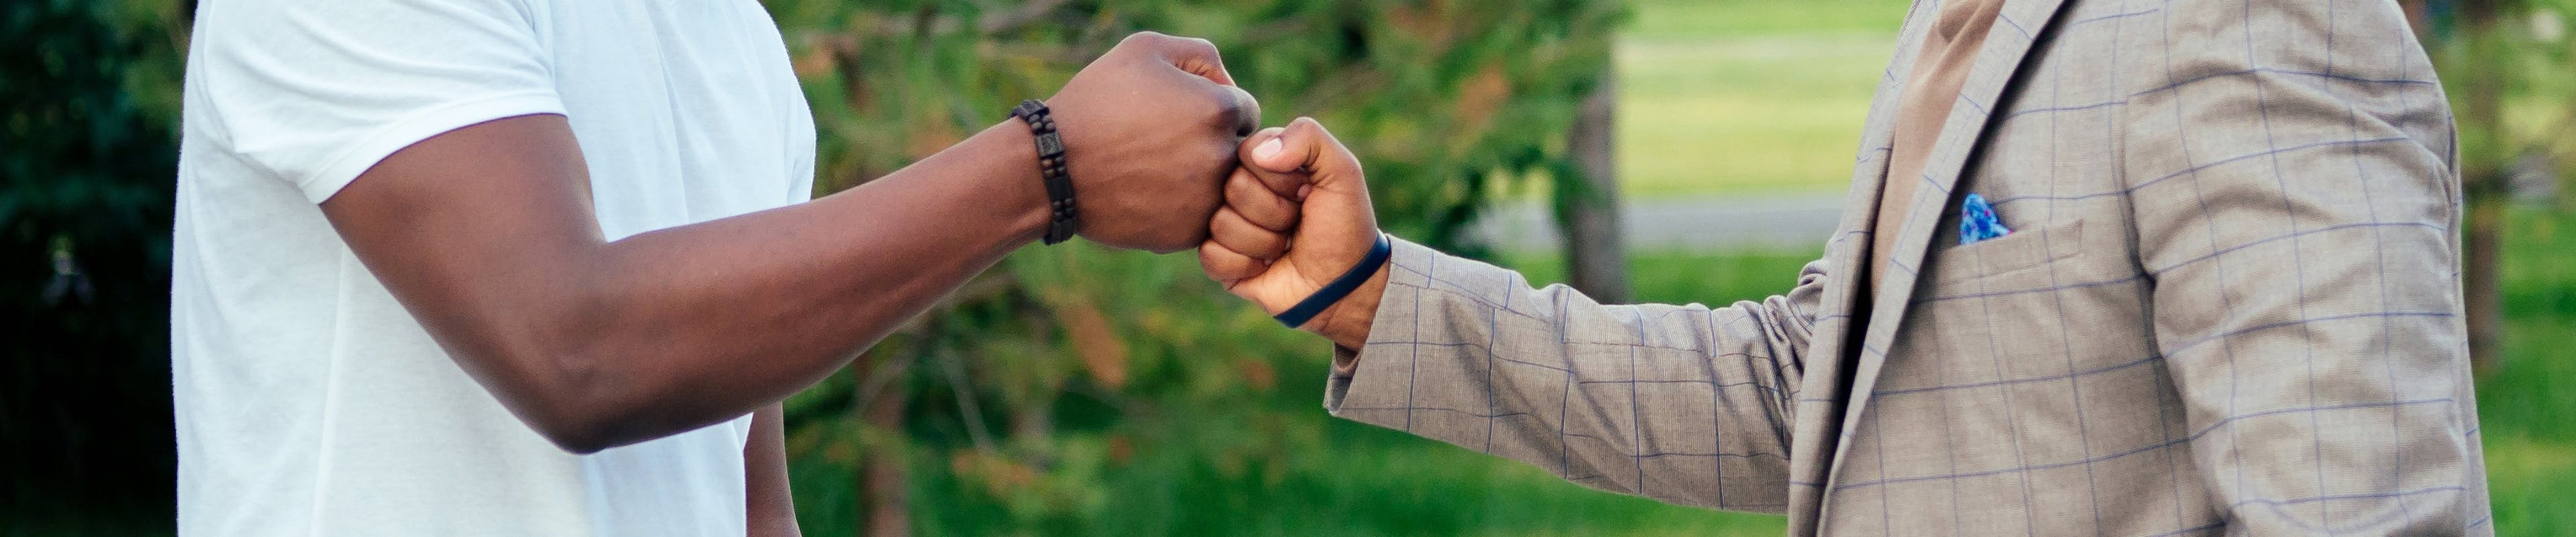 Two men fist bumping with each other